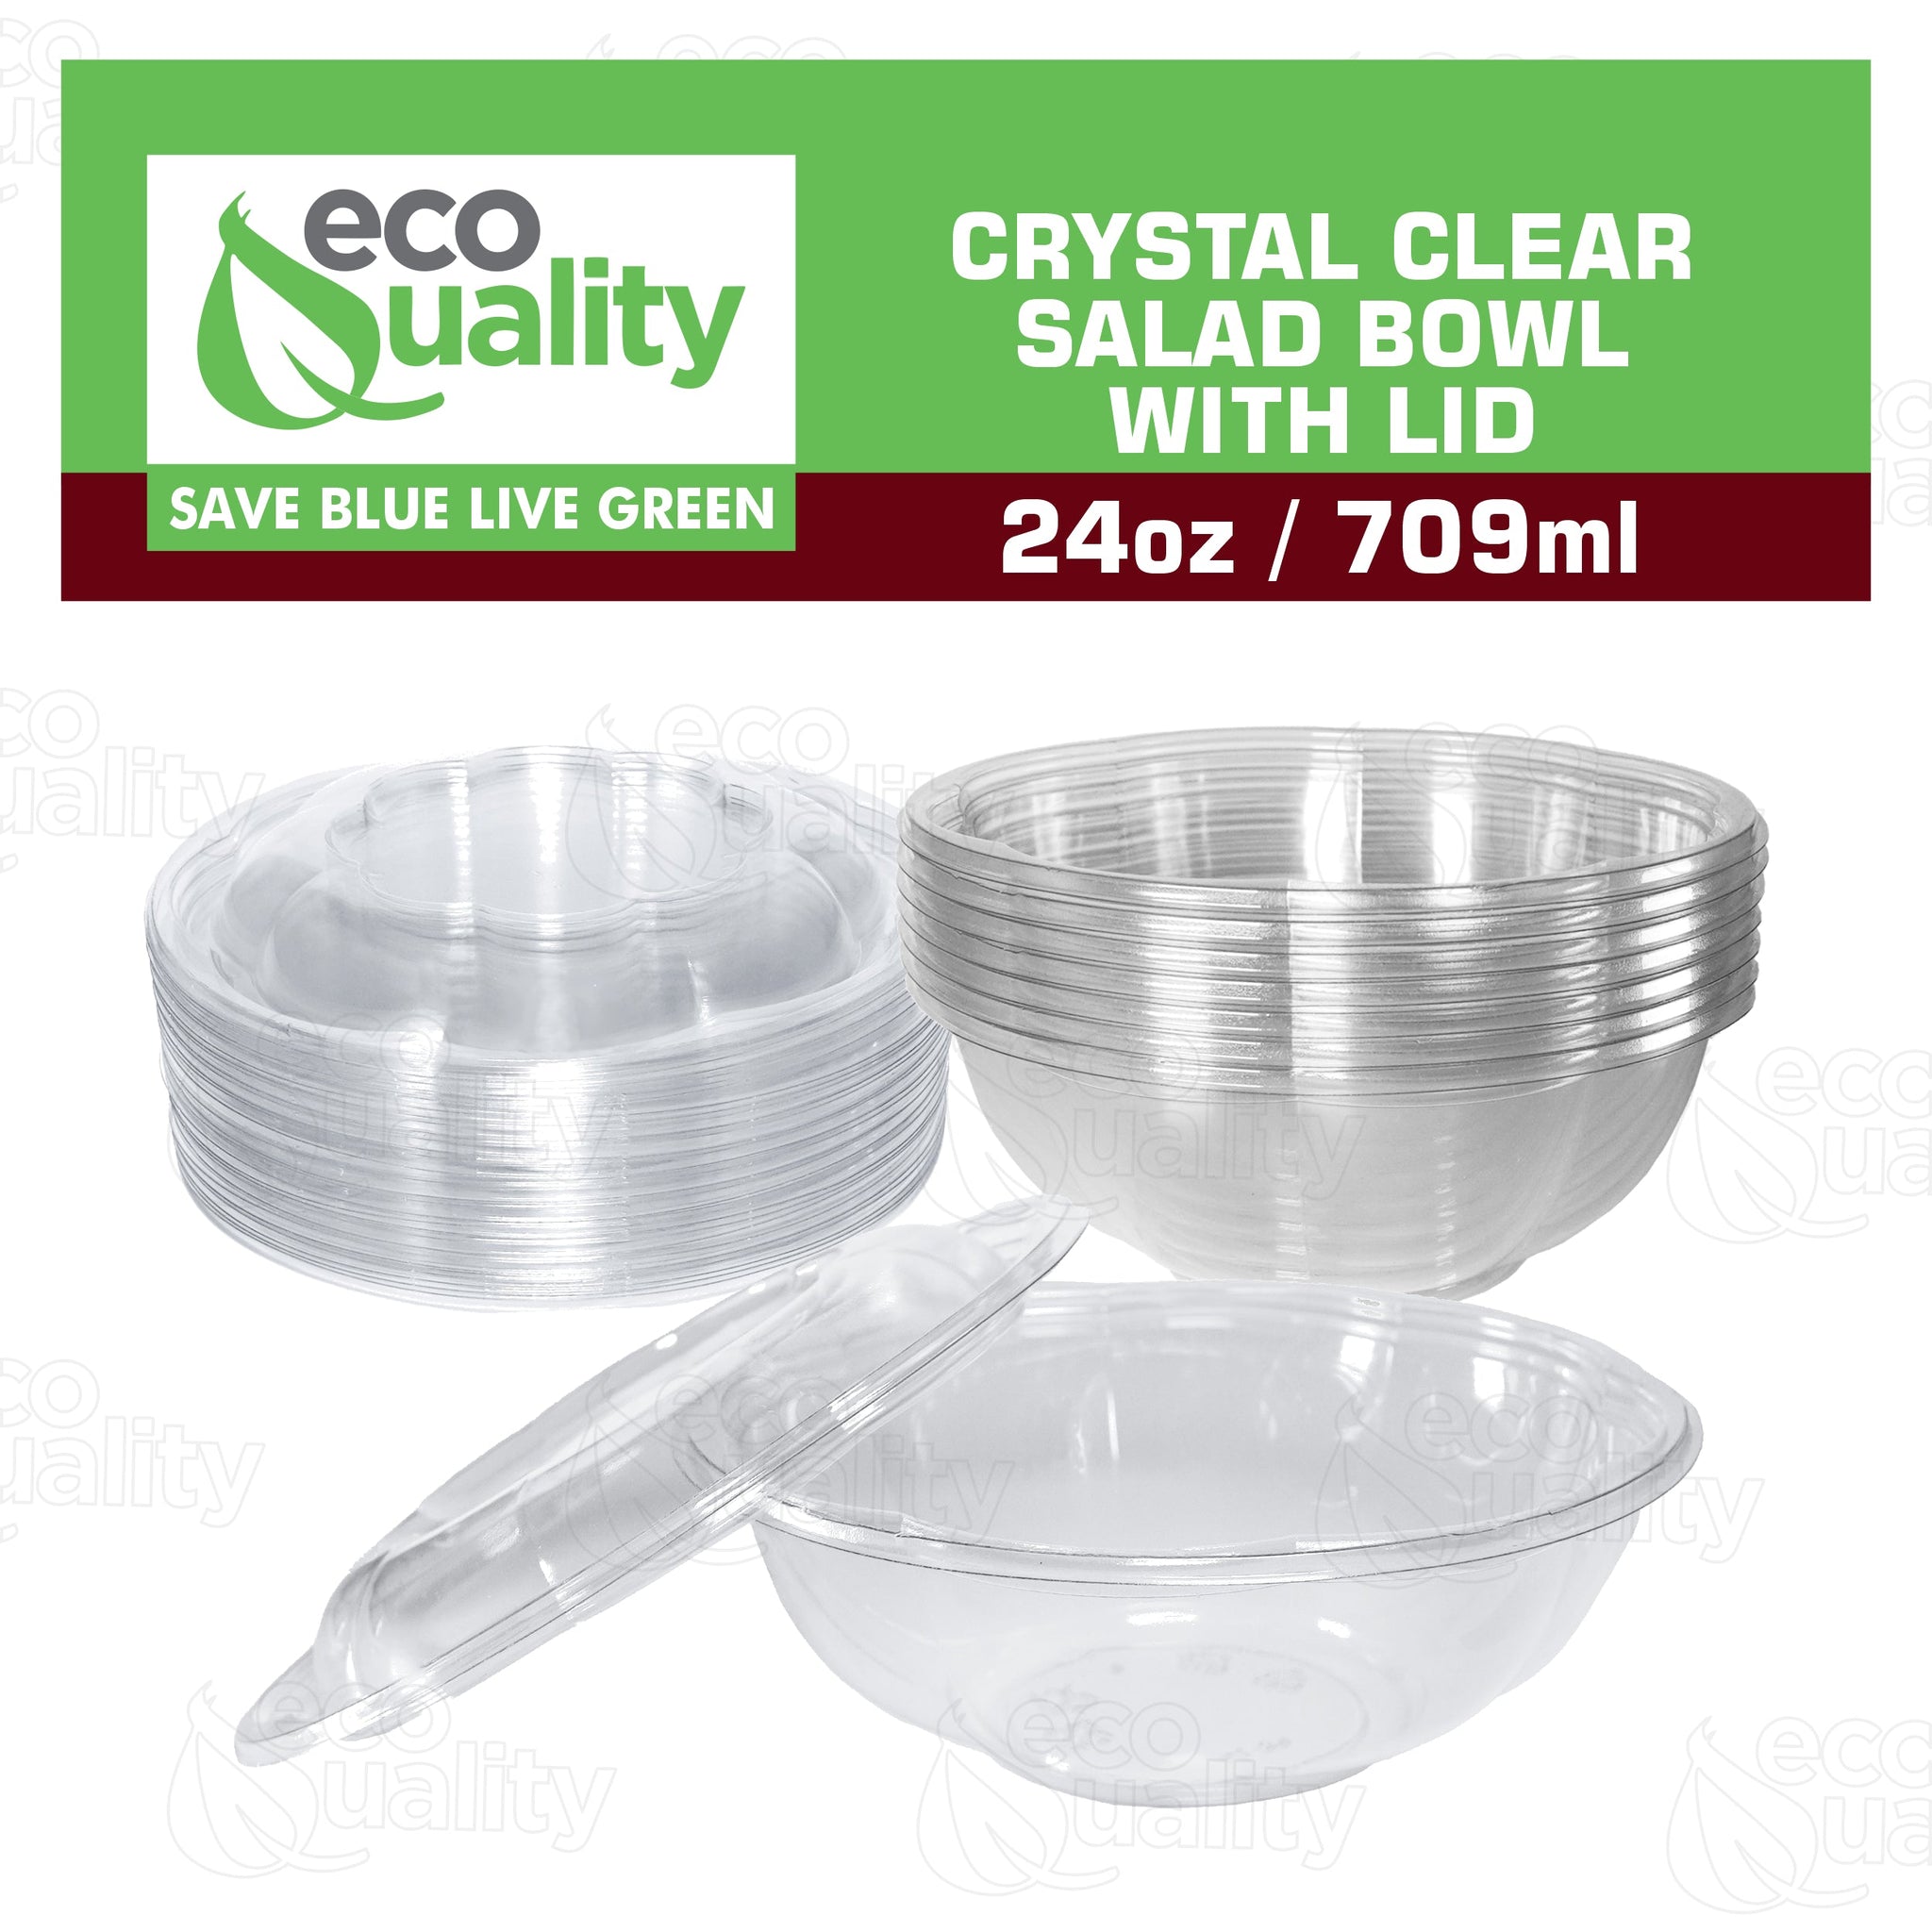 cold pasta salad bowls with lid clear plastic lunch bowl pet plastic deli salad supplies lunch dinner breakfast bowl to go takeout delivery packaging bowls rose bowl caterer catering events packaging solutions 18 ounces 18oz 24oz 24 ounces 32oz 32 ounces 48 ounces 48 oz 40 oz 40 ounces 64oz 64 ounces